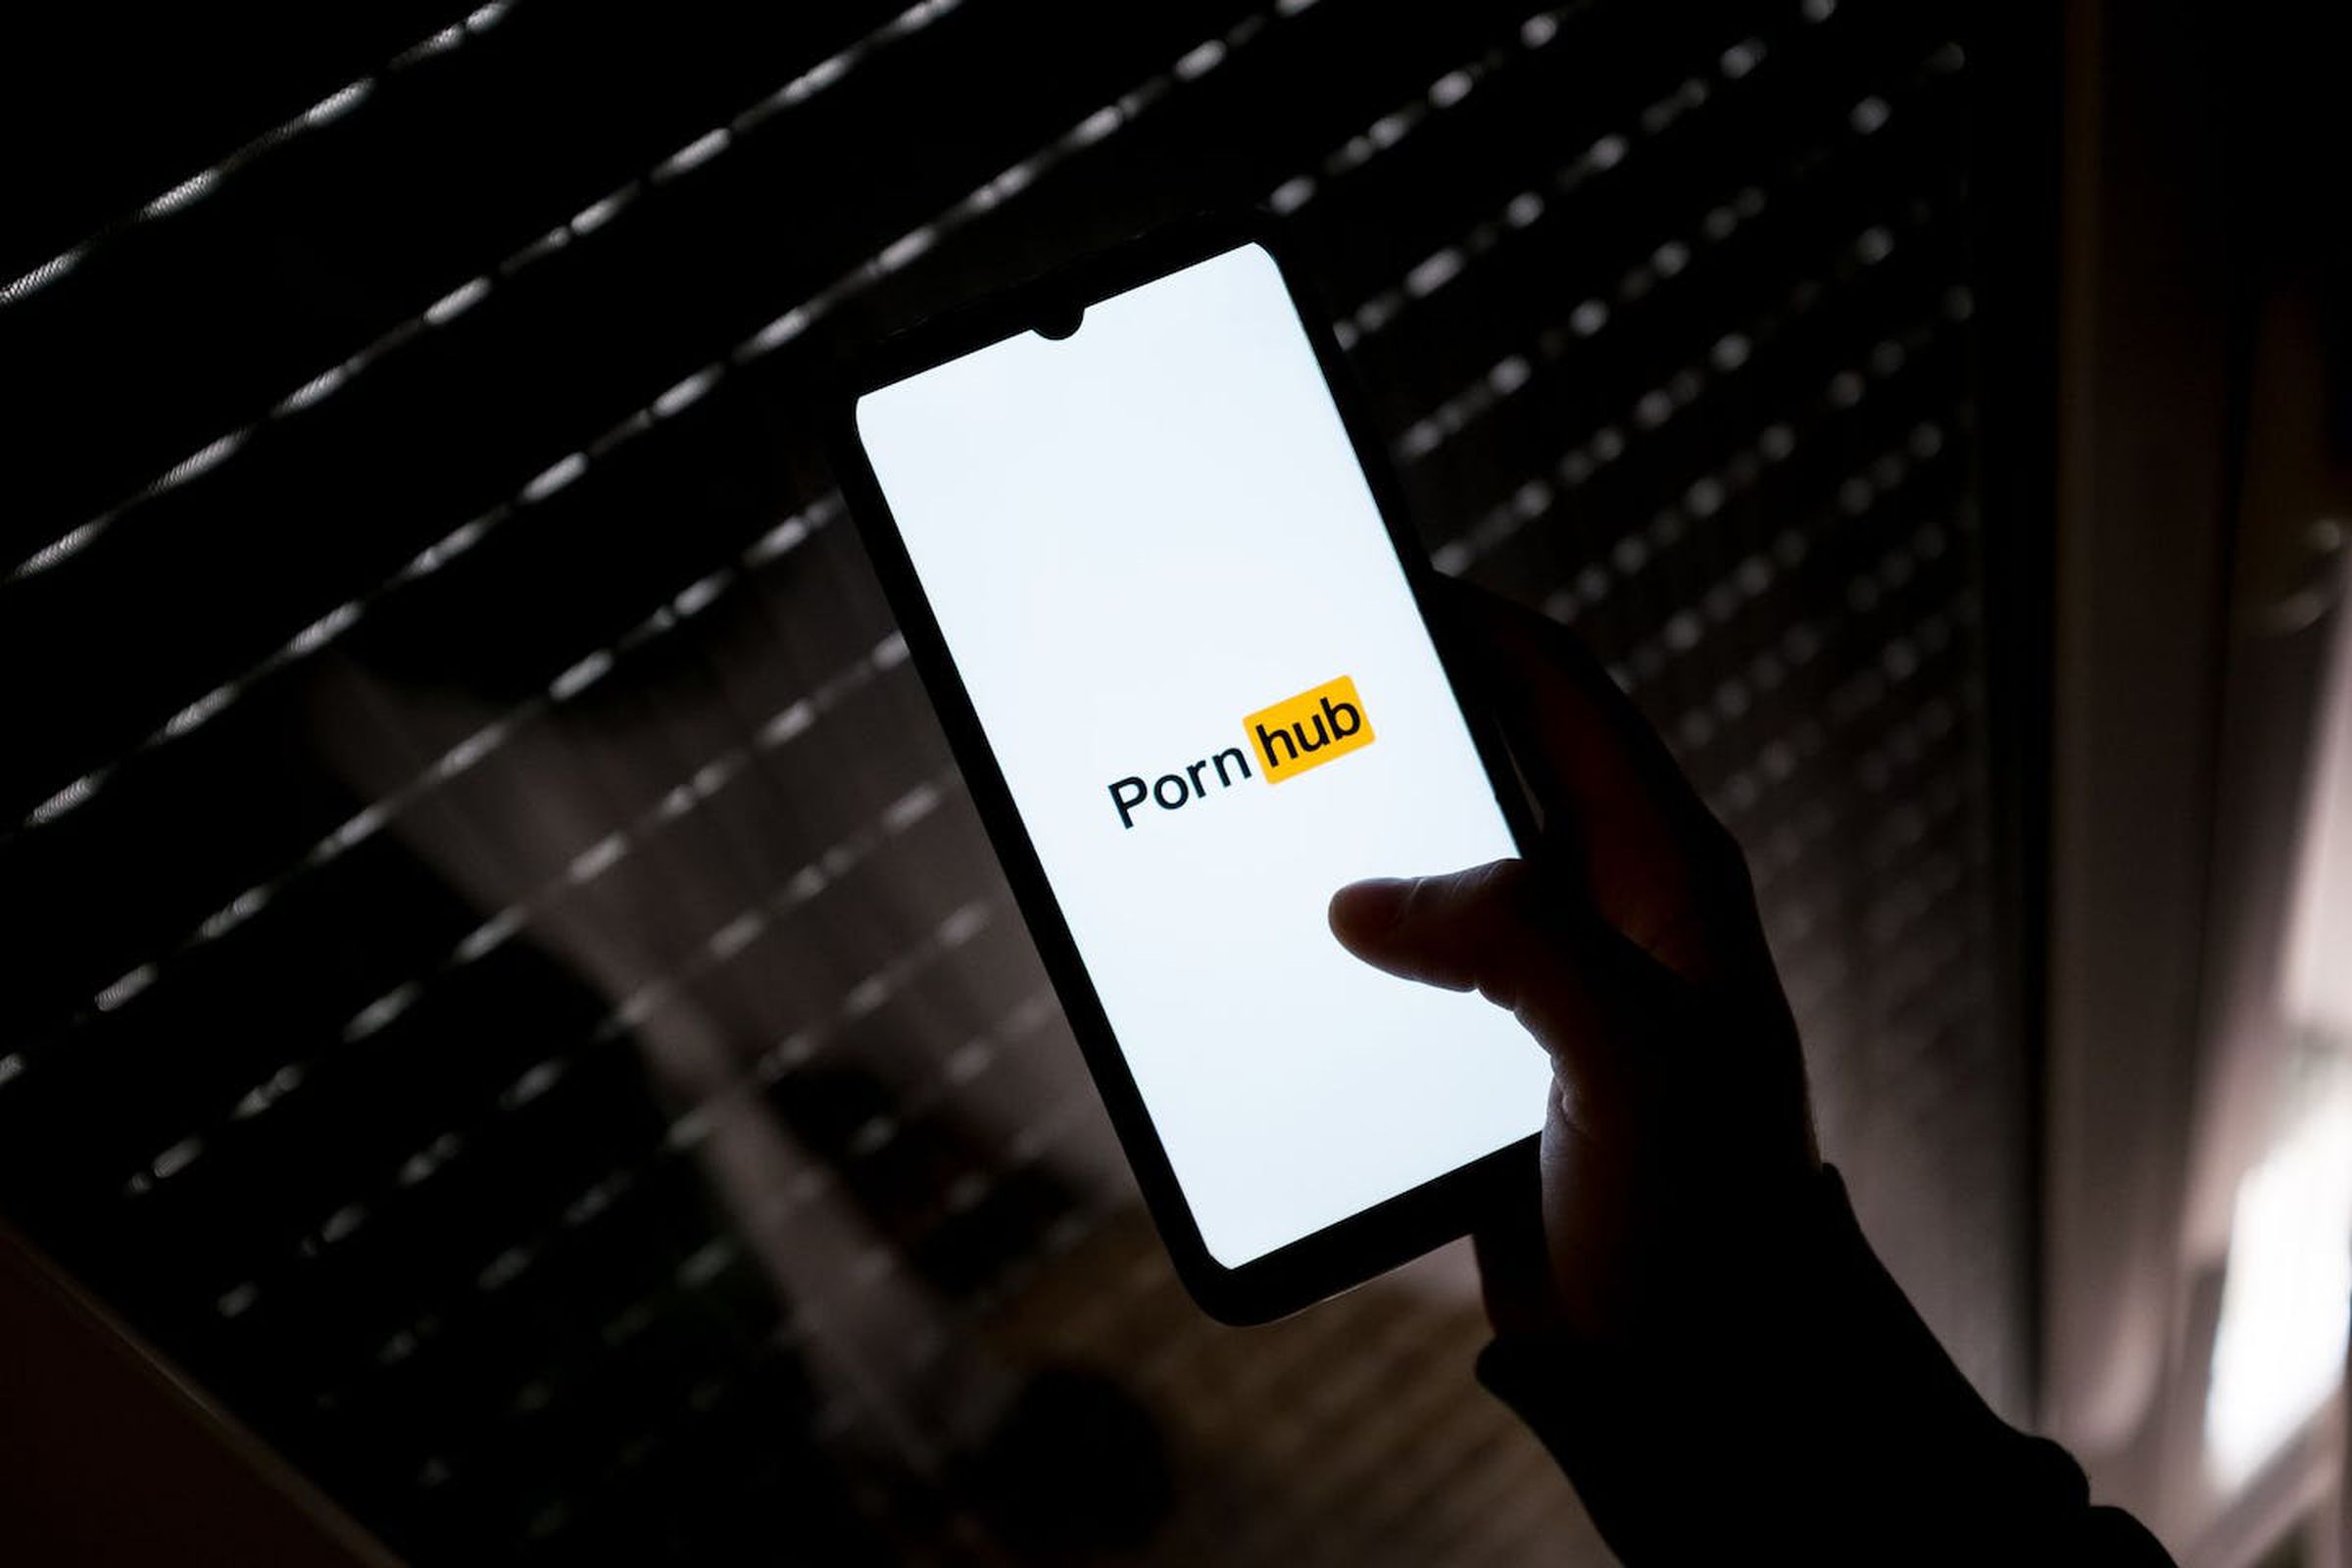 A hand holding up a smartphone with PornHub opened up in the dark.